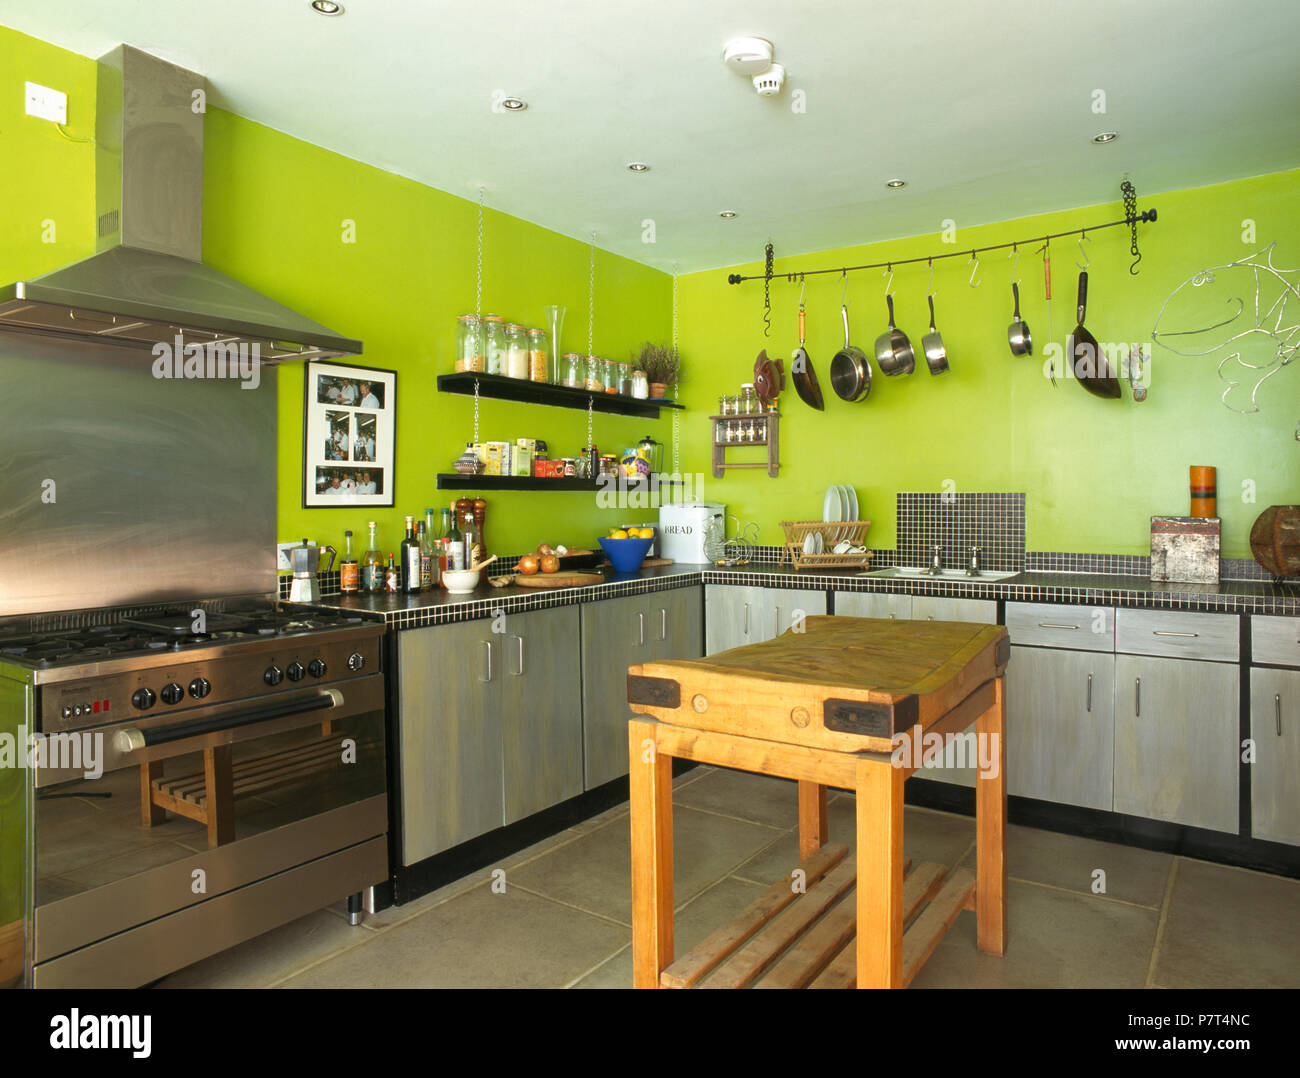 Butcher's block in lime green nineties kitchen with stainless steel range oven Stock Photo